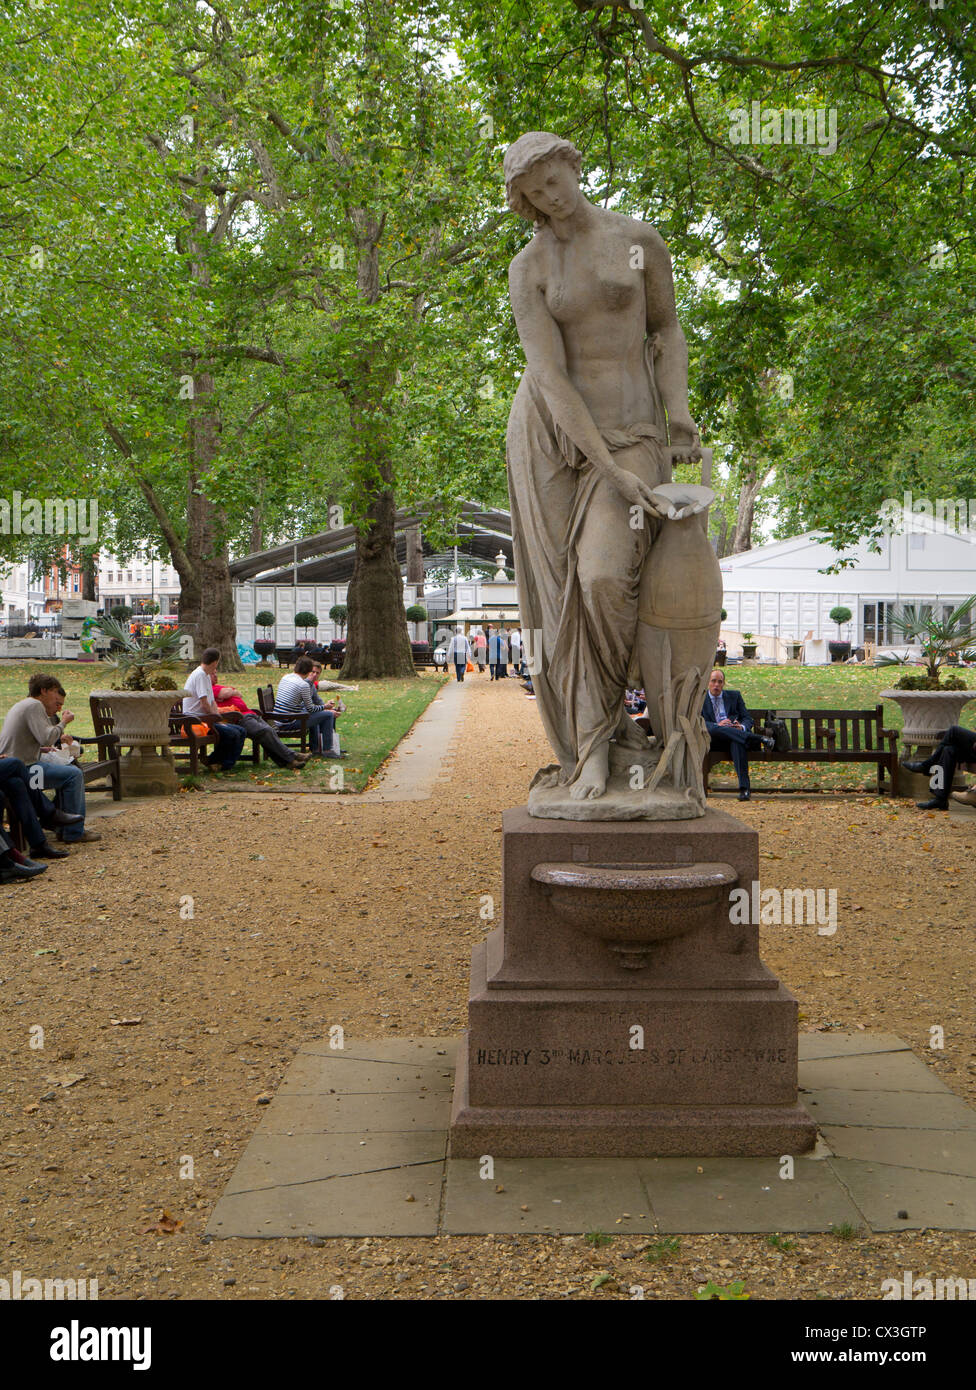 Berkeley Square figure of the nymph holding an overflowing vase, Westminster London UK. Stock Photo